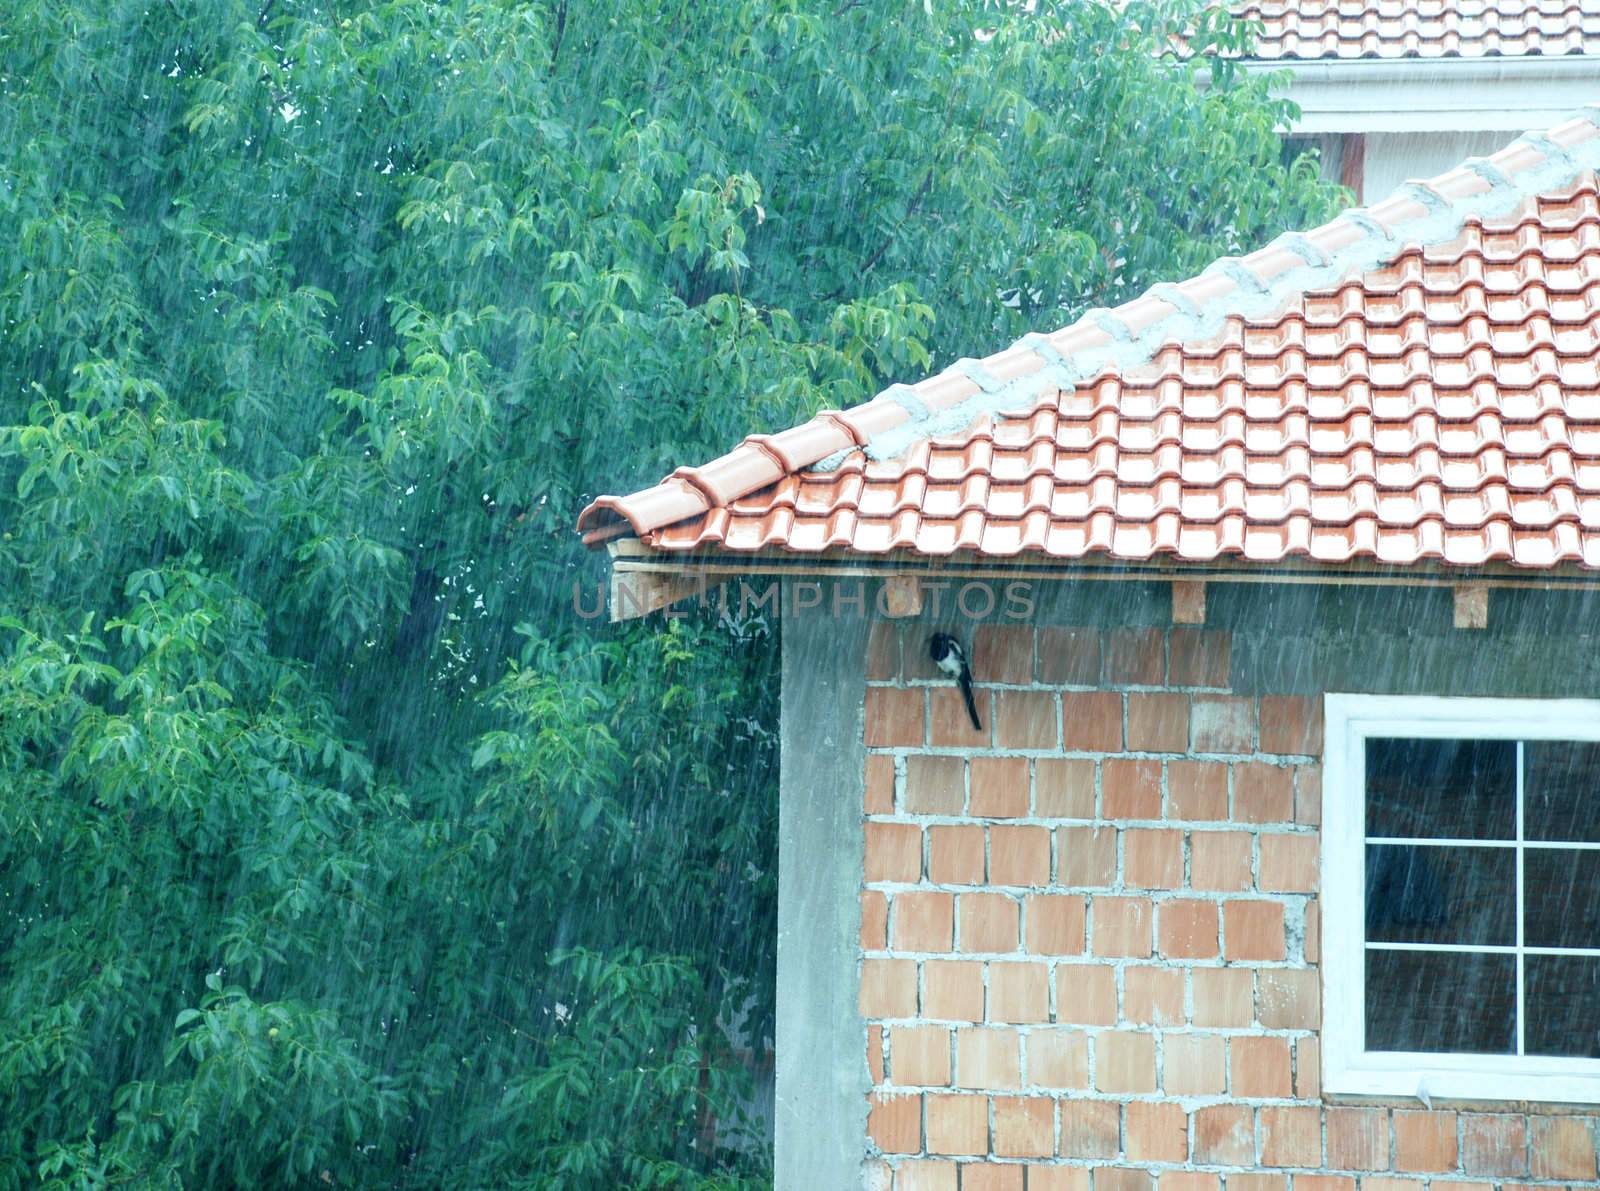 magpie hiding from rain under tiled roof